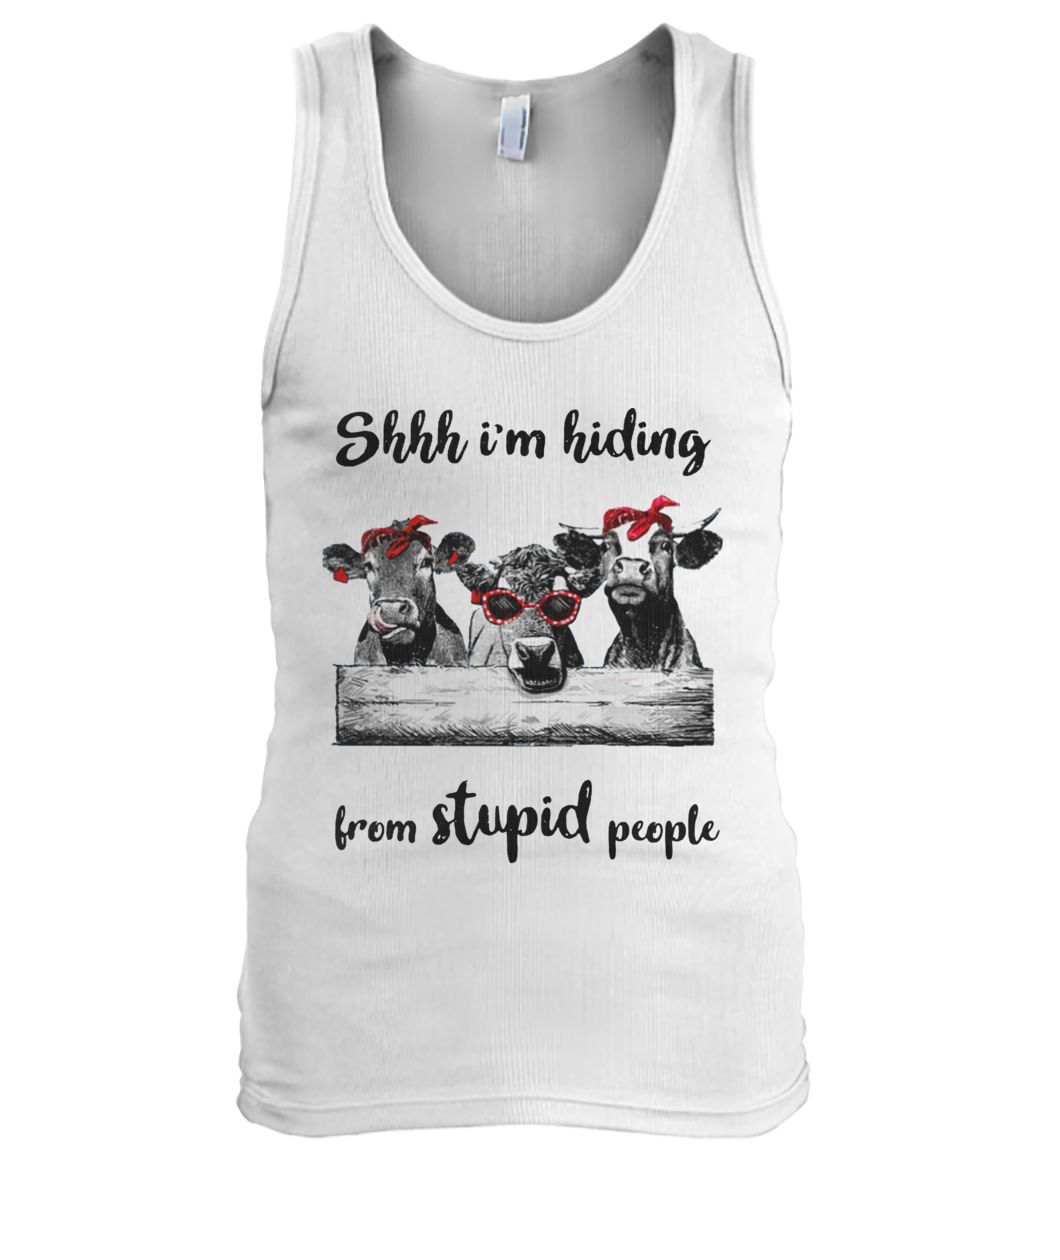 Cows shhh I'm hiding from stupid people men's tank top